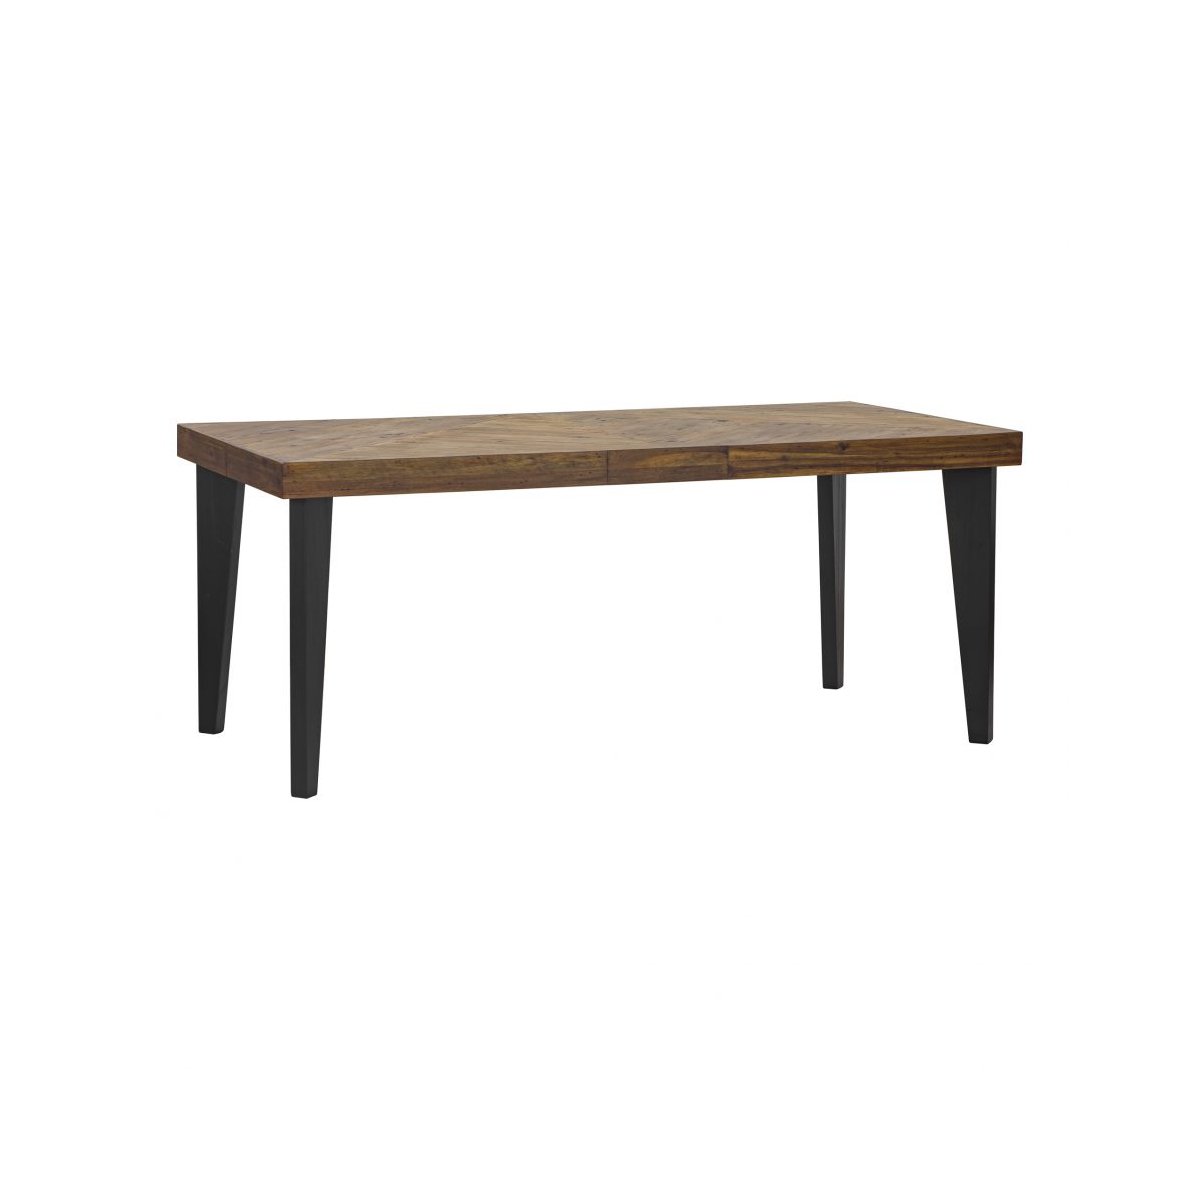 Load image into Gallery viewer, Parq Rectangular Dining Table Dining Tables Moe&amp;#39;s     Four Hands, Burke Decor, Mid Century Modern Furniture, Old Bones Furniture Company, Old Bones Co, Modern Mid Century, Designer Furniture, https://www.oldbonesco.com/
